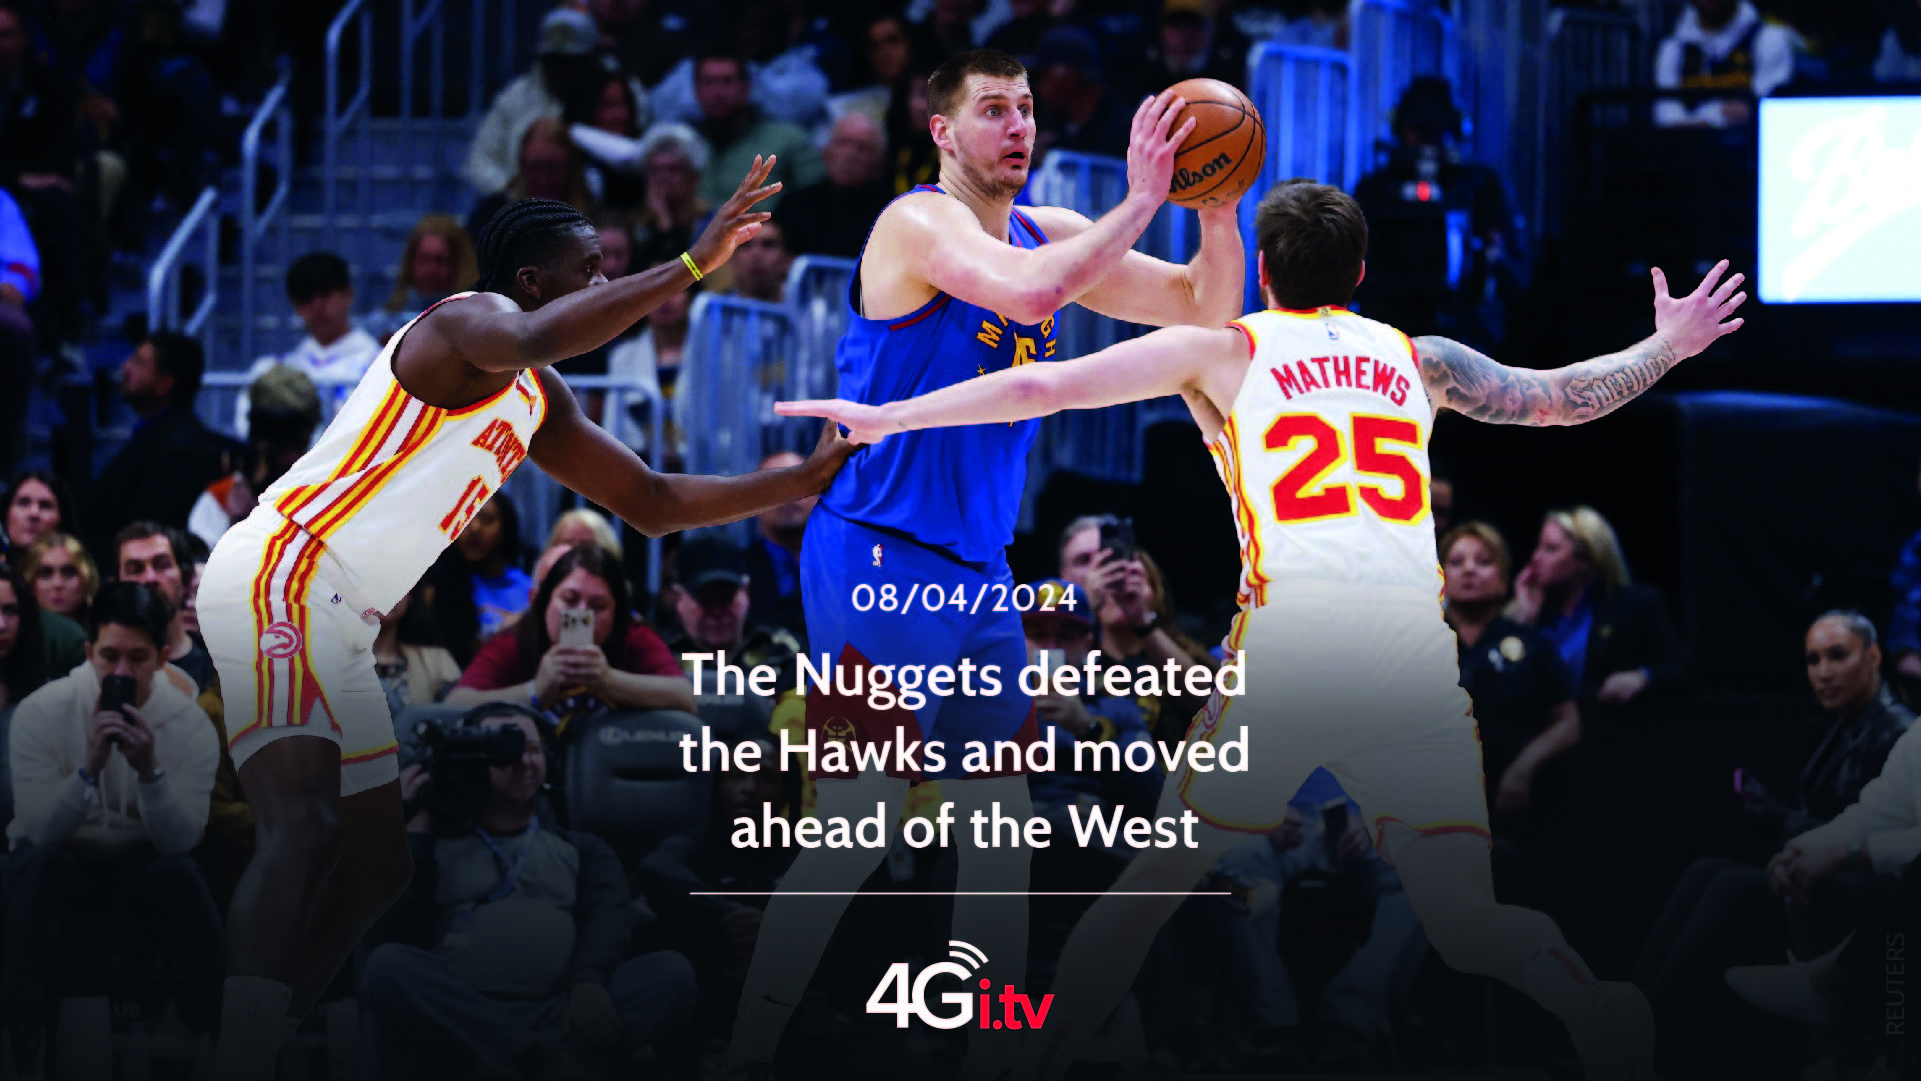 Подробнее о статье The Nuggets defeated the Hawks and moved ahead of the West